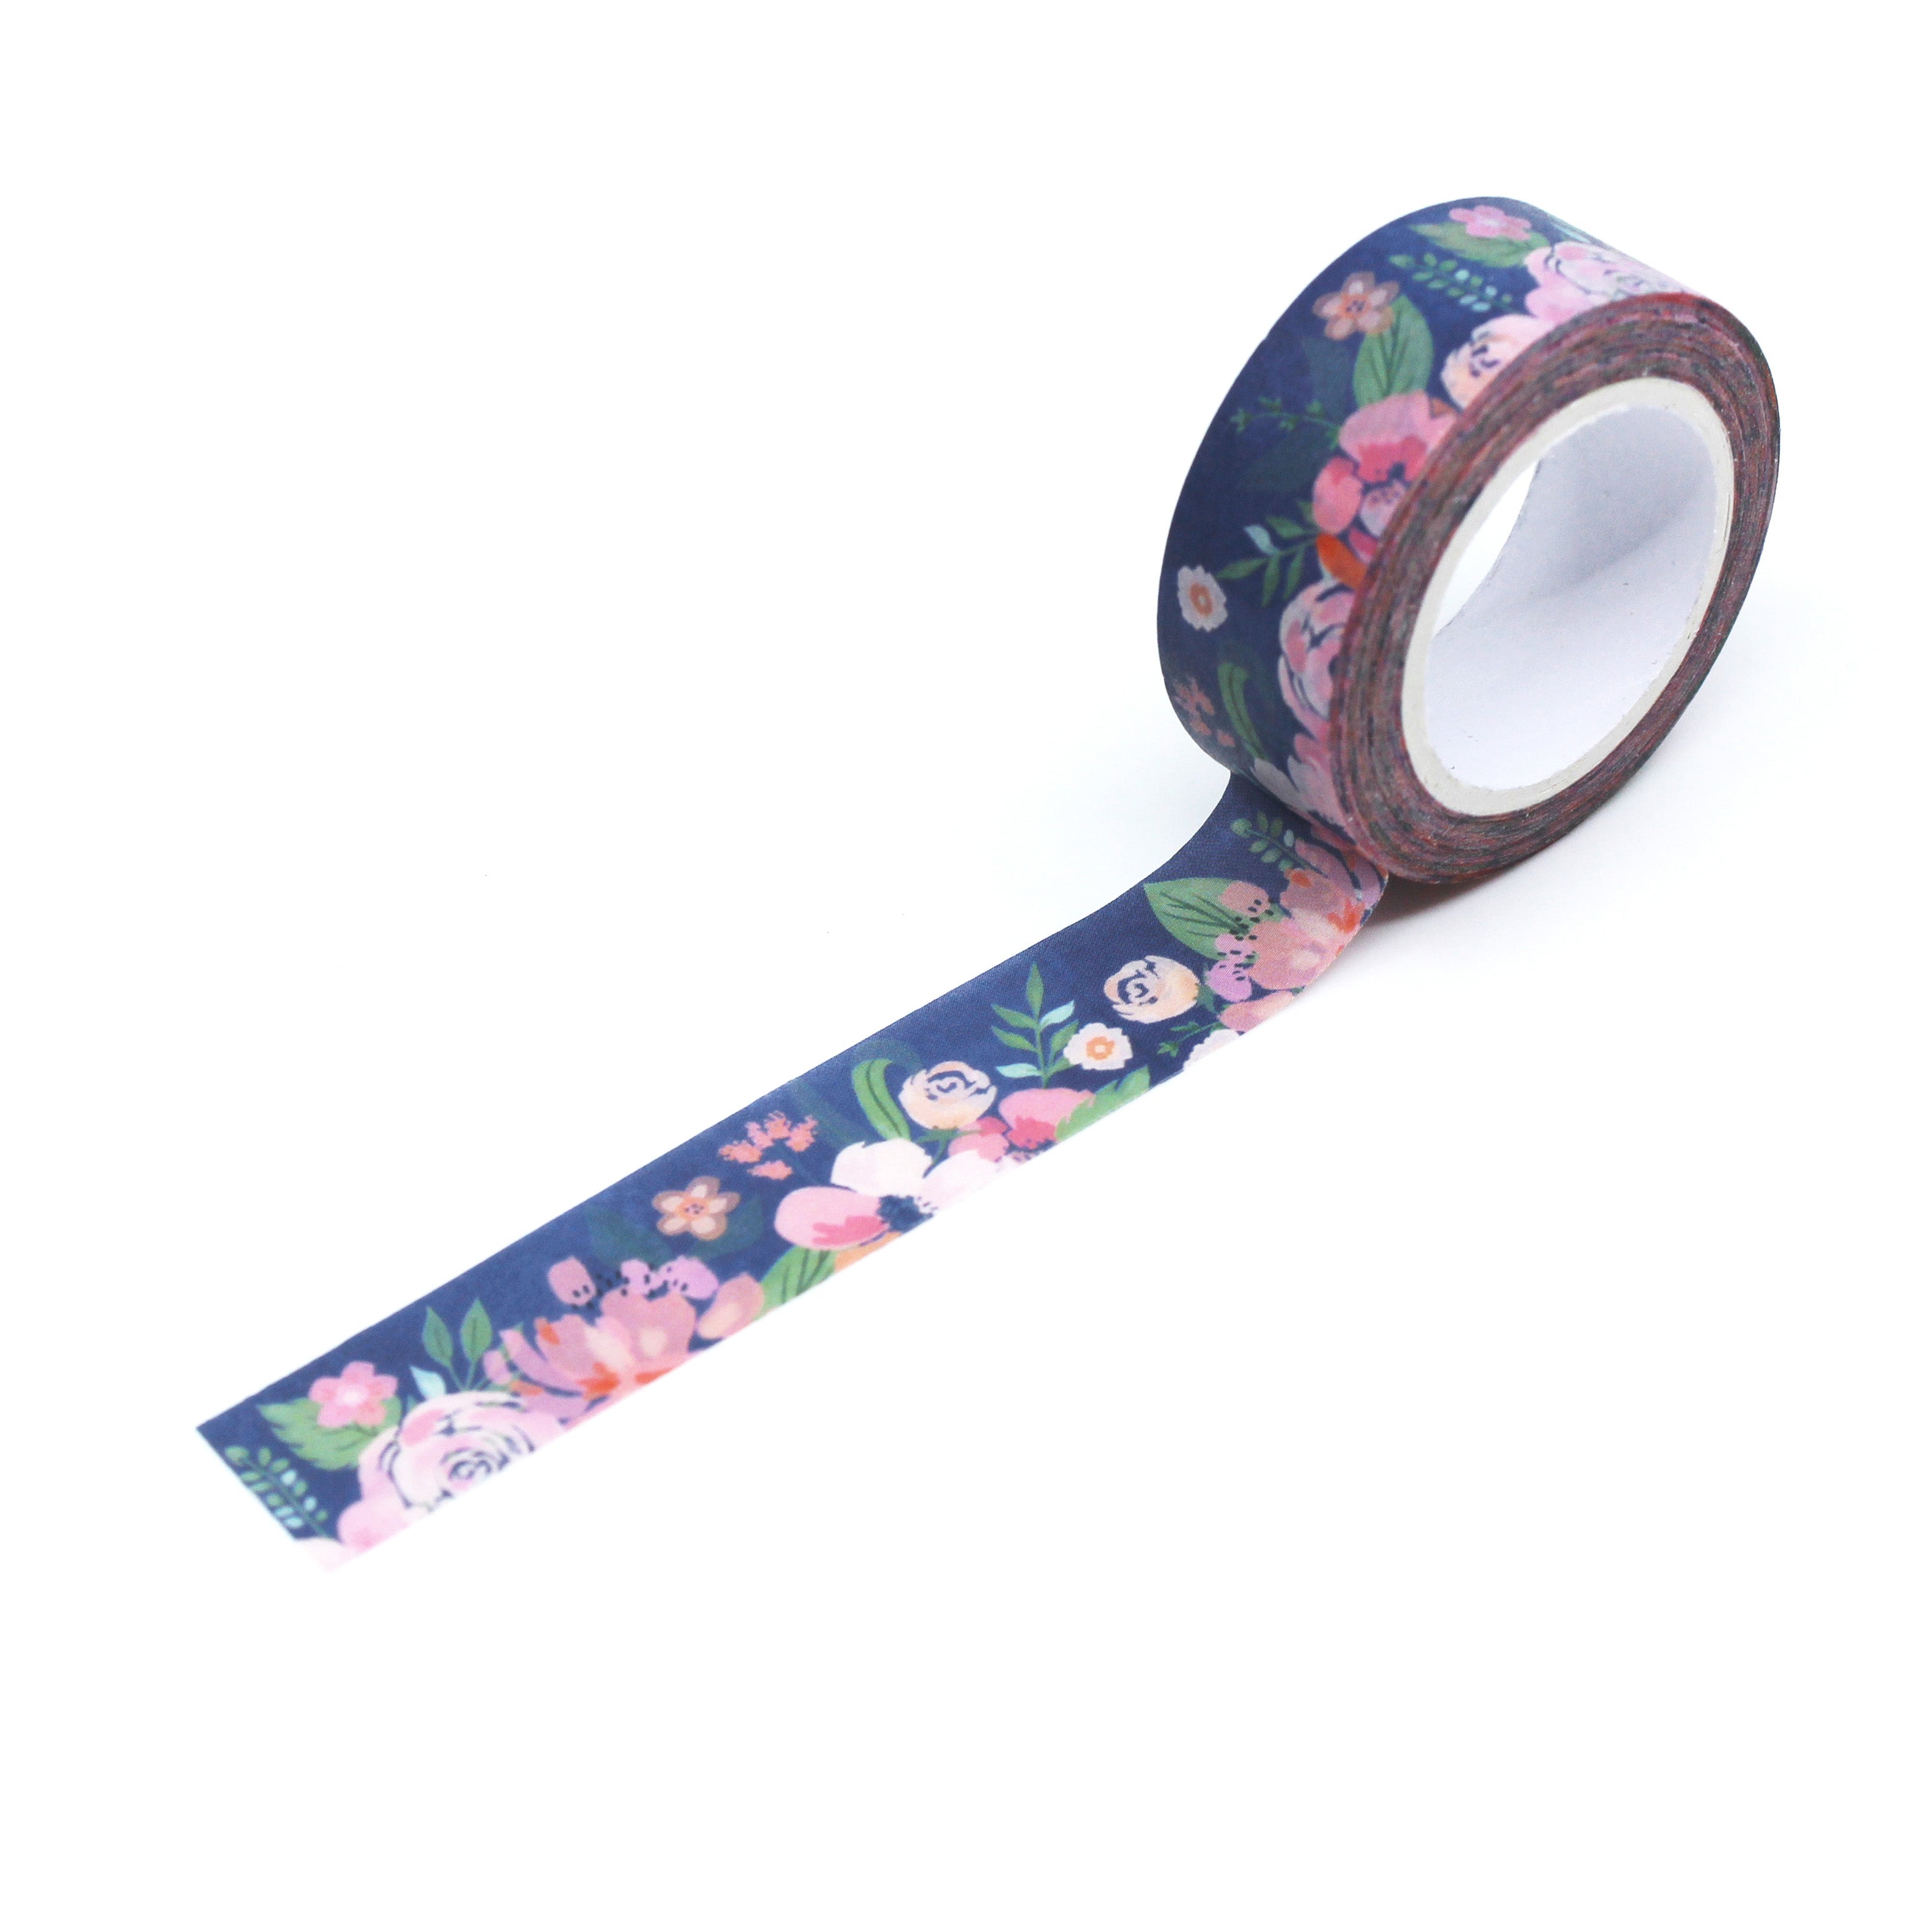 Elevate your crafts with our Navy Blue Floral Washi Tape, featuring a timeless floral pattern in a rich navy blue hue. Ideal for adding a touch of classic elegance to your projects. This tape is sold at BBB Supplies Craft Shop.